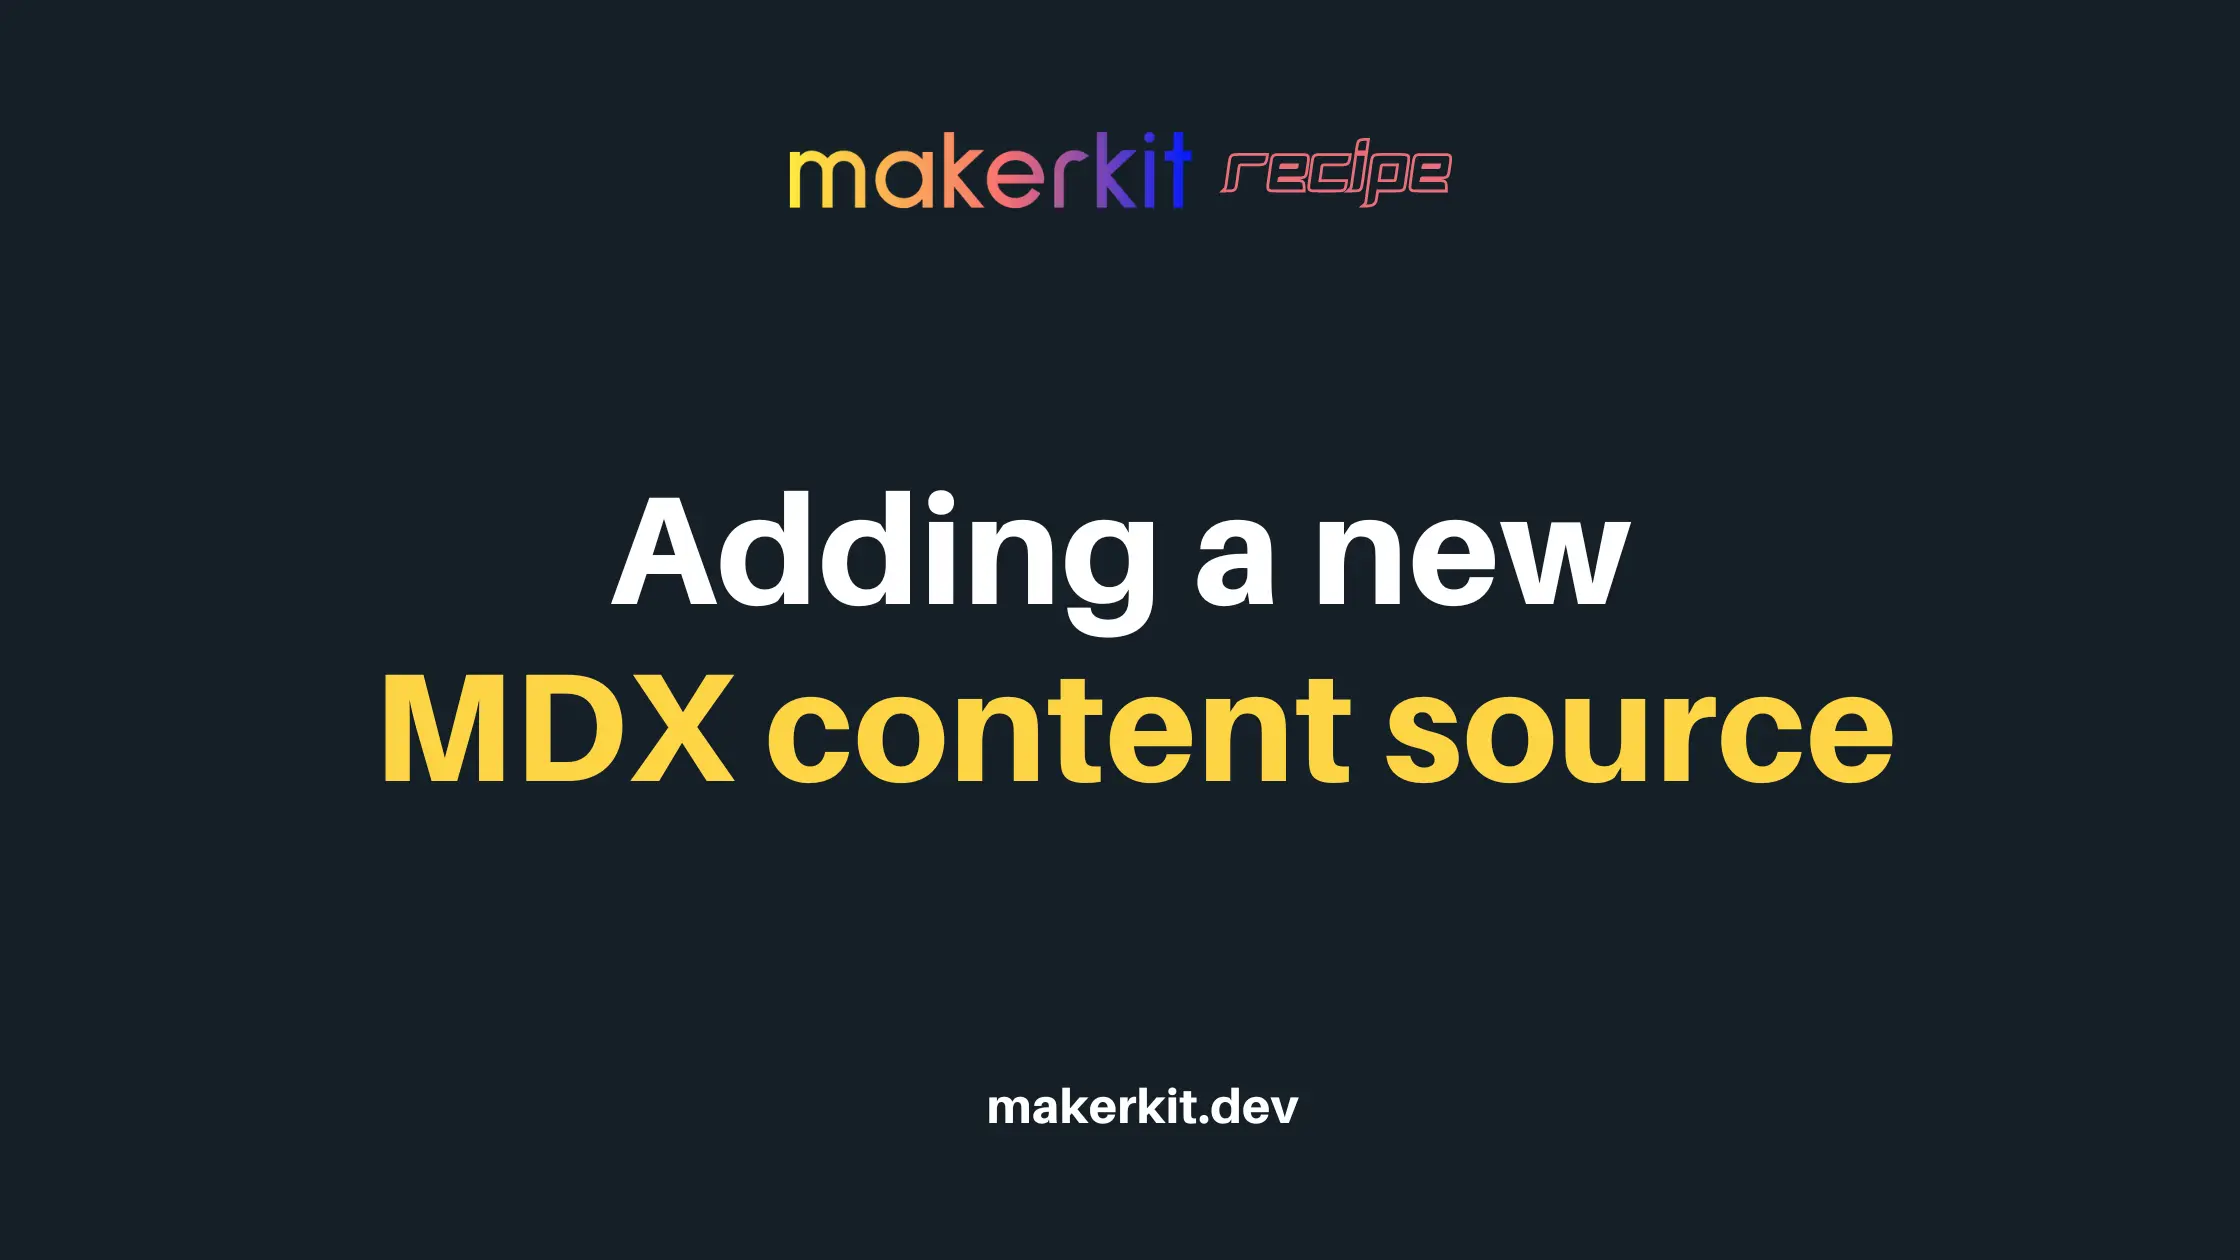 Cover Image for Adding a new MDX content source